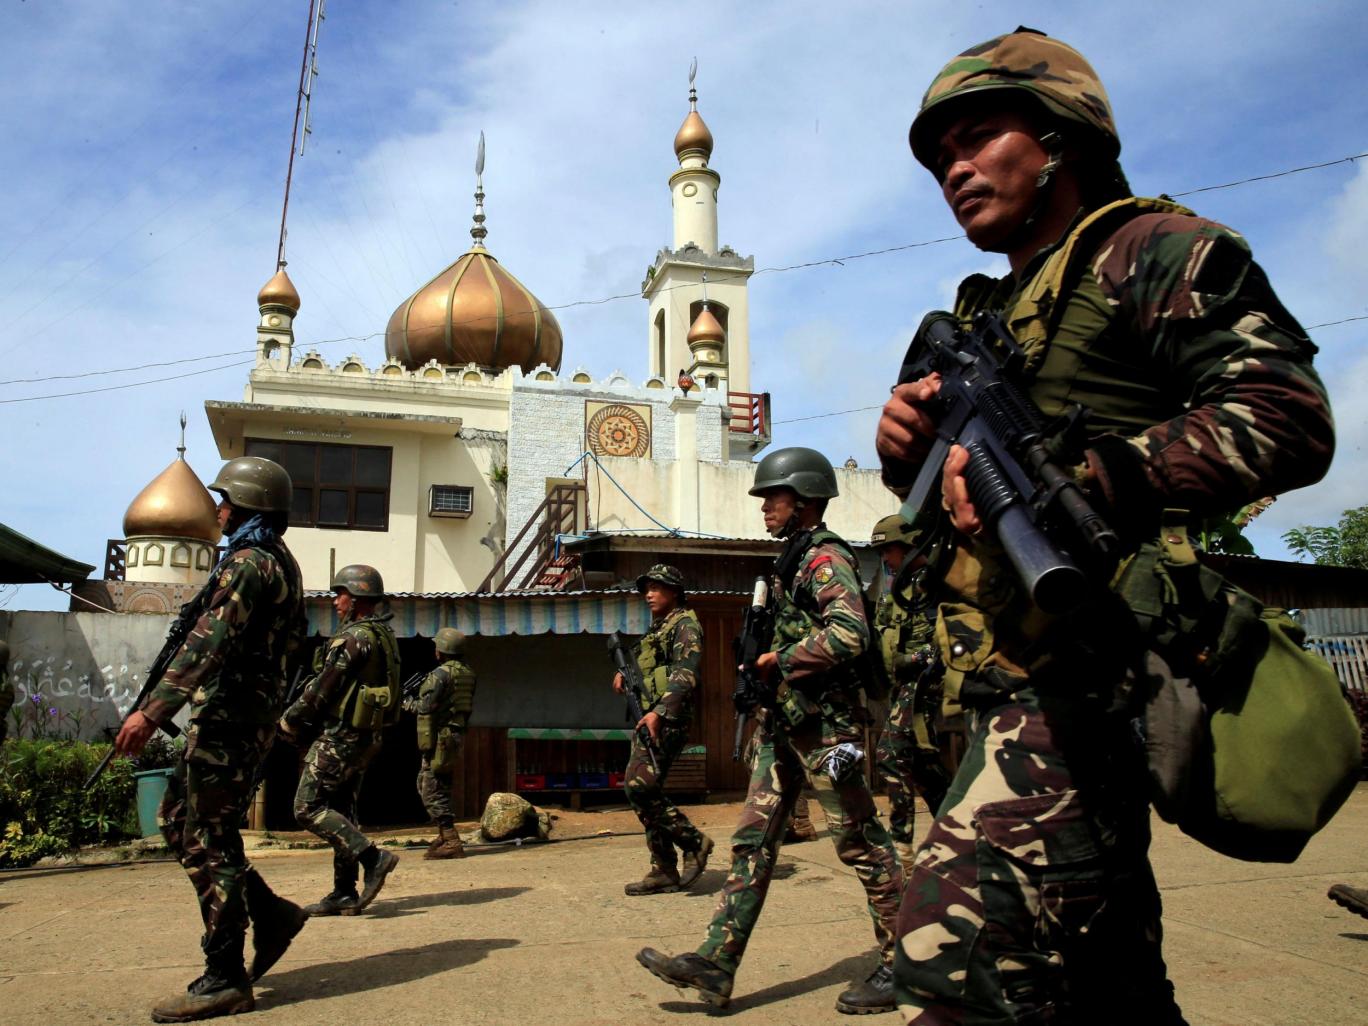 PHILIPPINES Filipino military promises “not to bomb” mosques